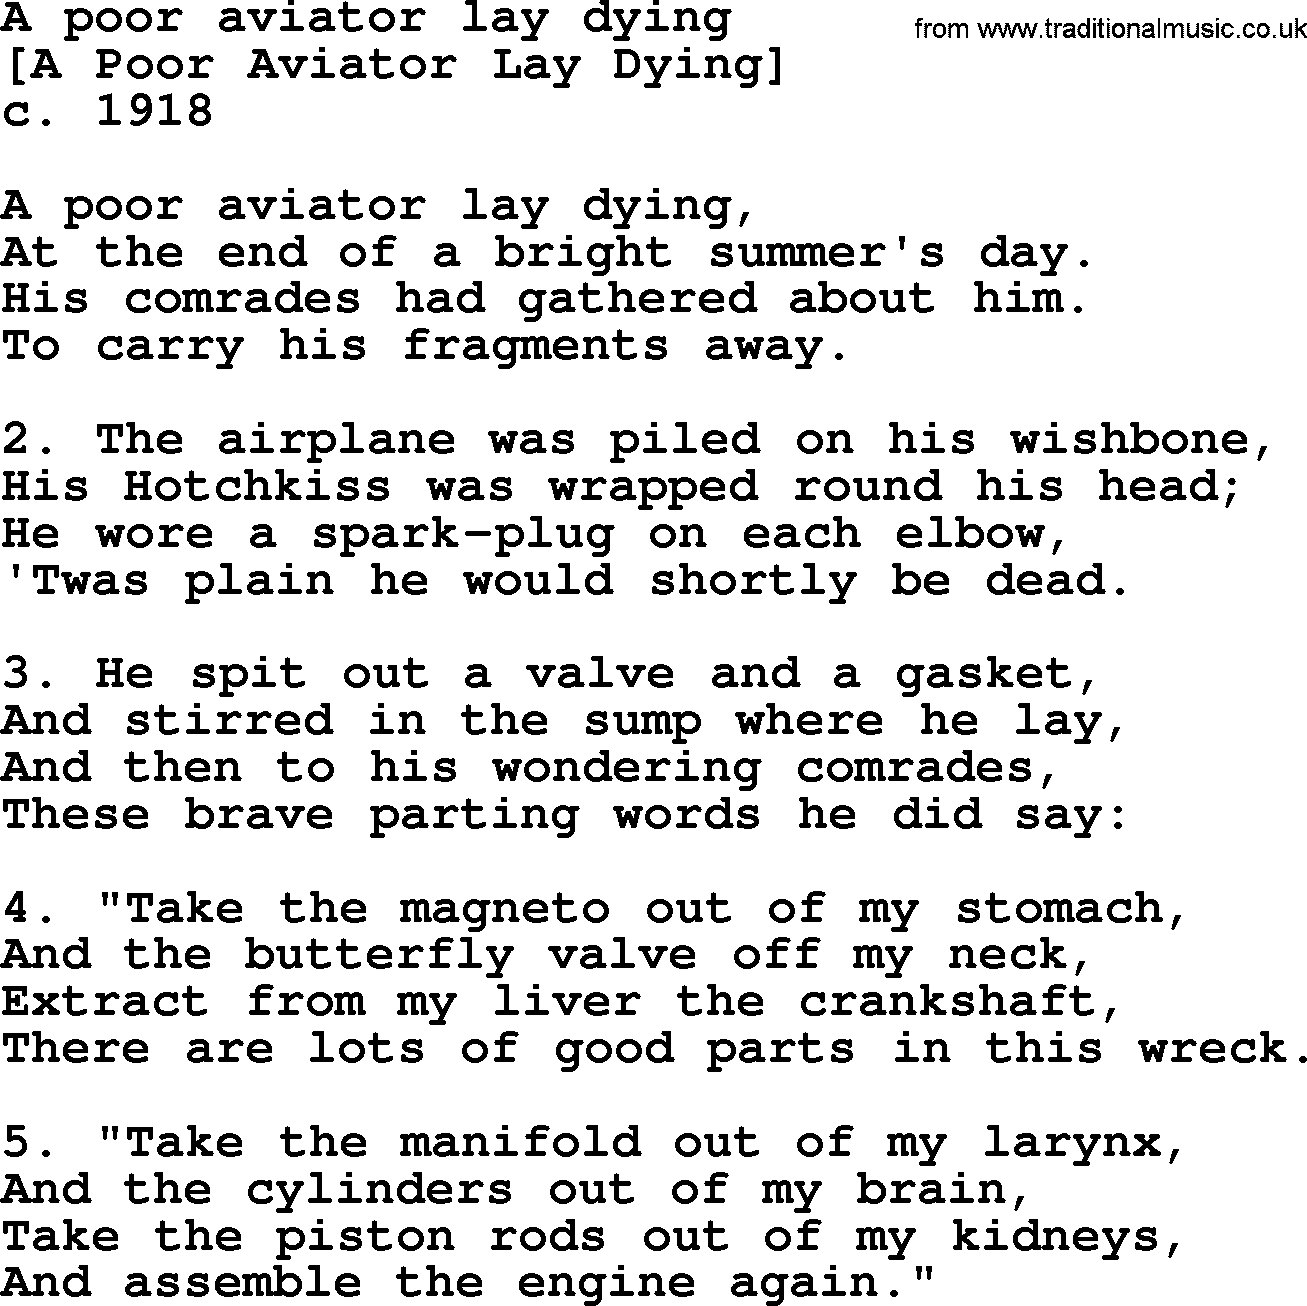 Old American Song: A Poor Aviator Lay Dying, lyrics